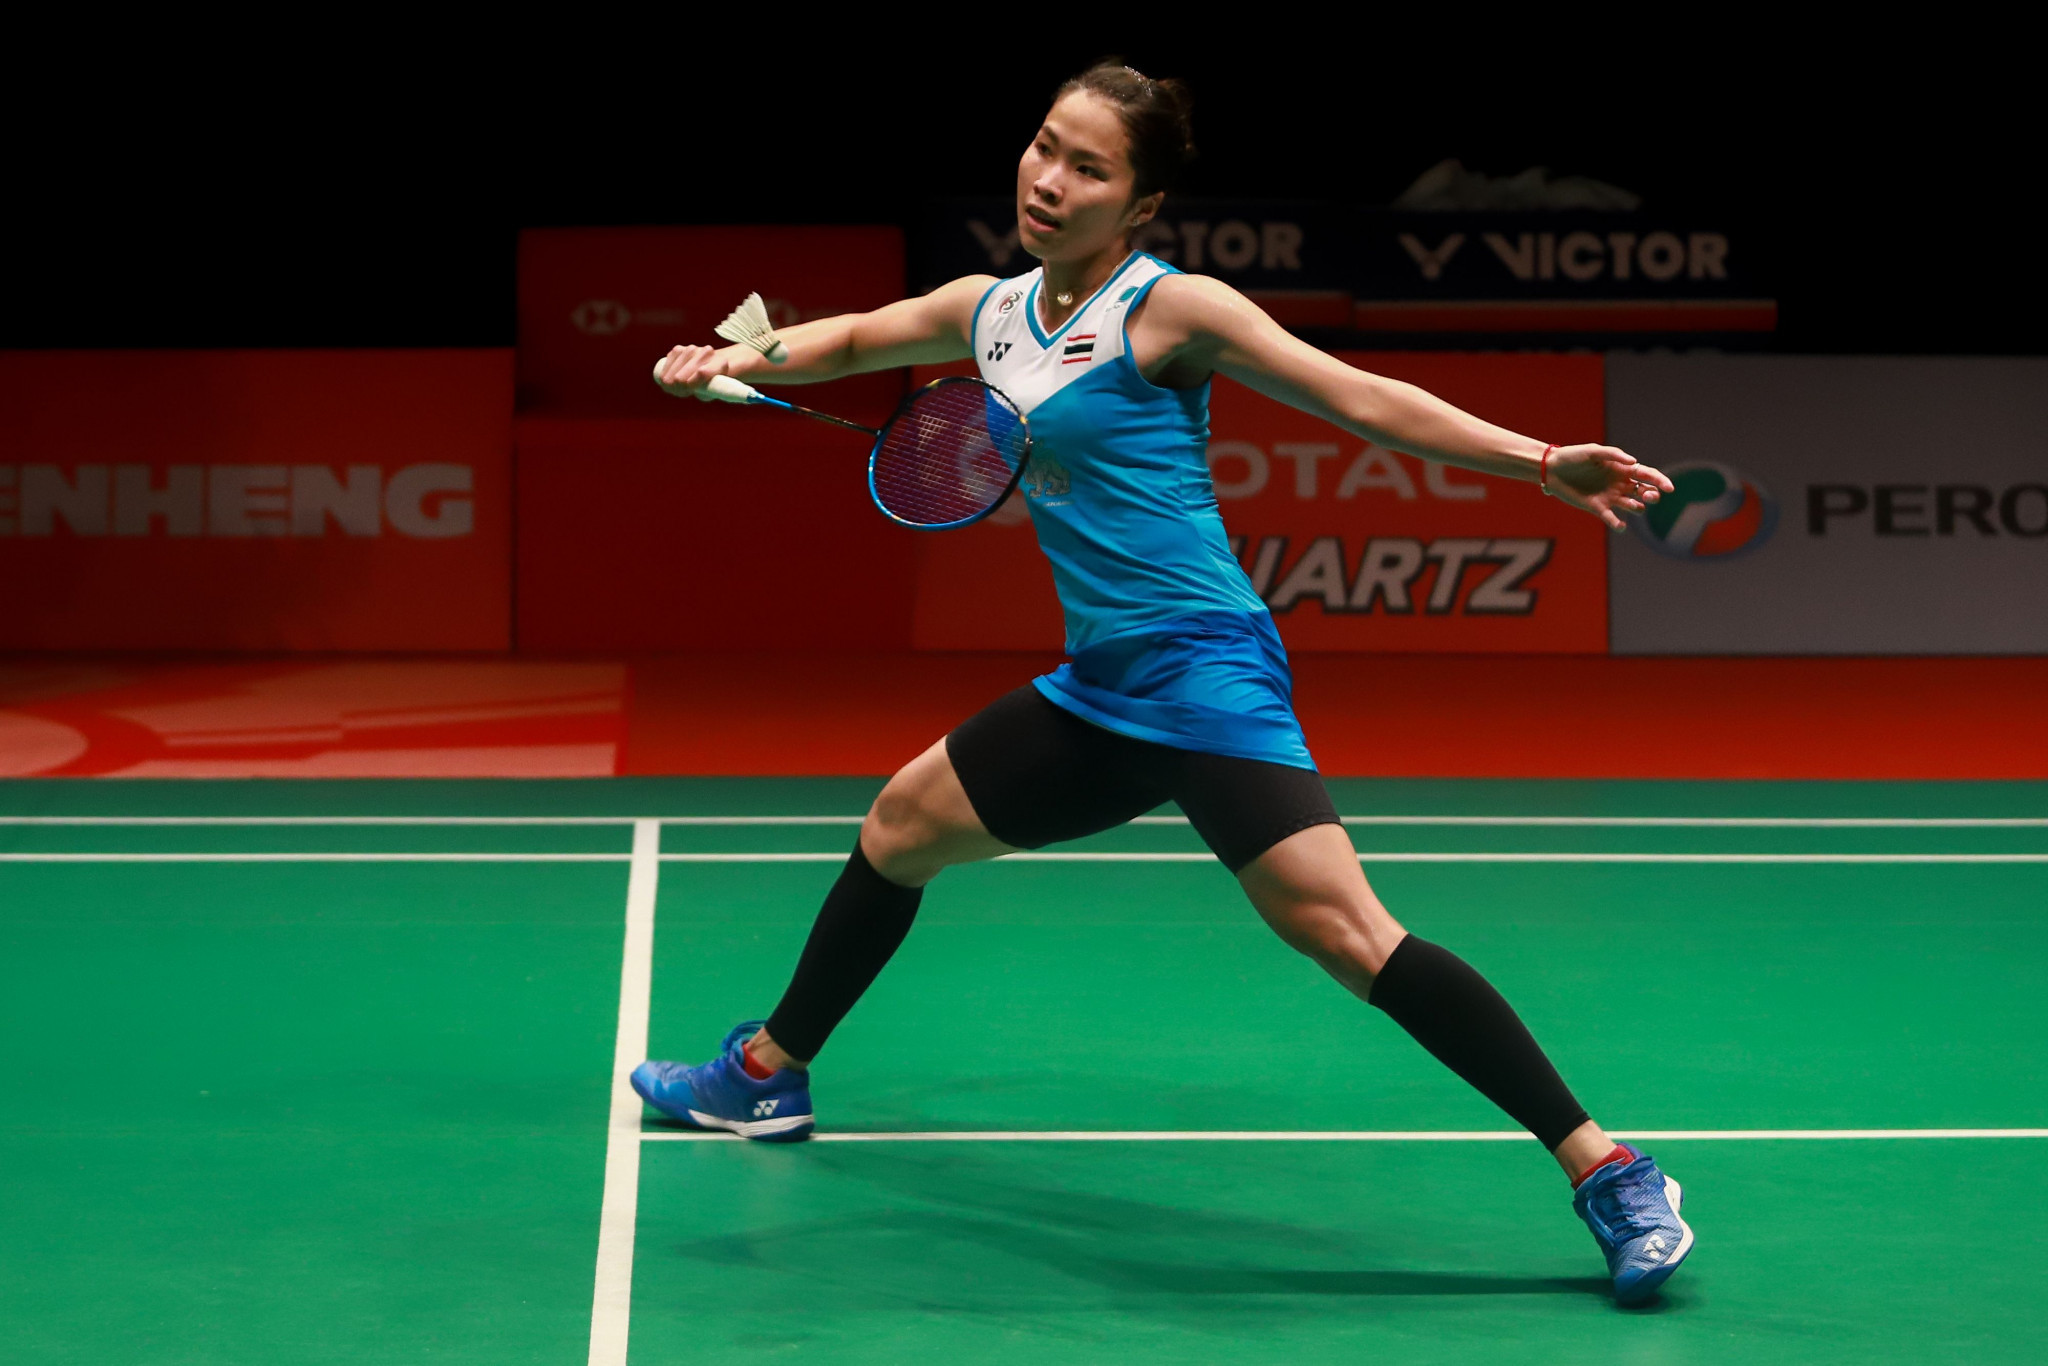 Ratchanok Intanon won the women's event for the third time in her career ©Getty Images